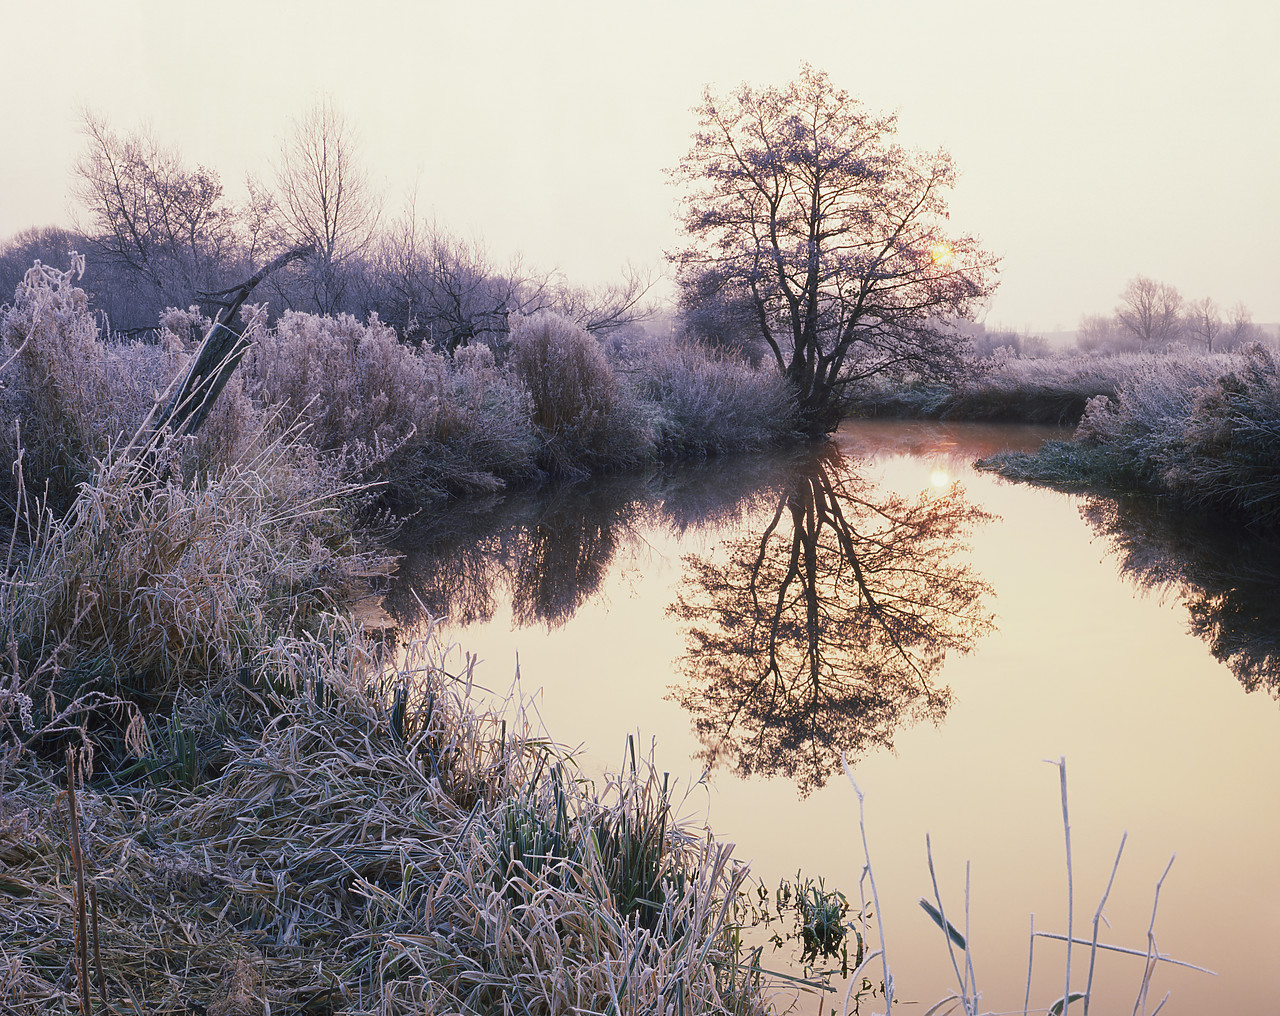 #892518-2 - River Yare at Sunrise, Norwich, Norfolk, England